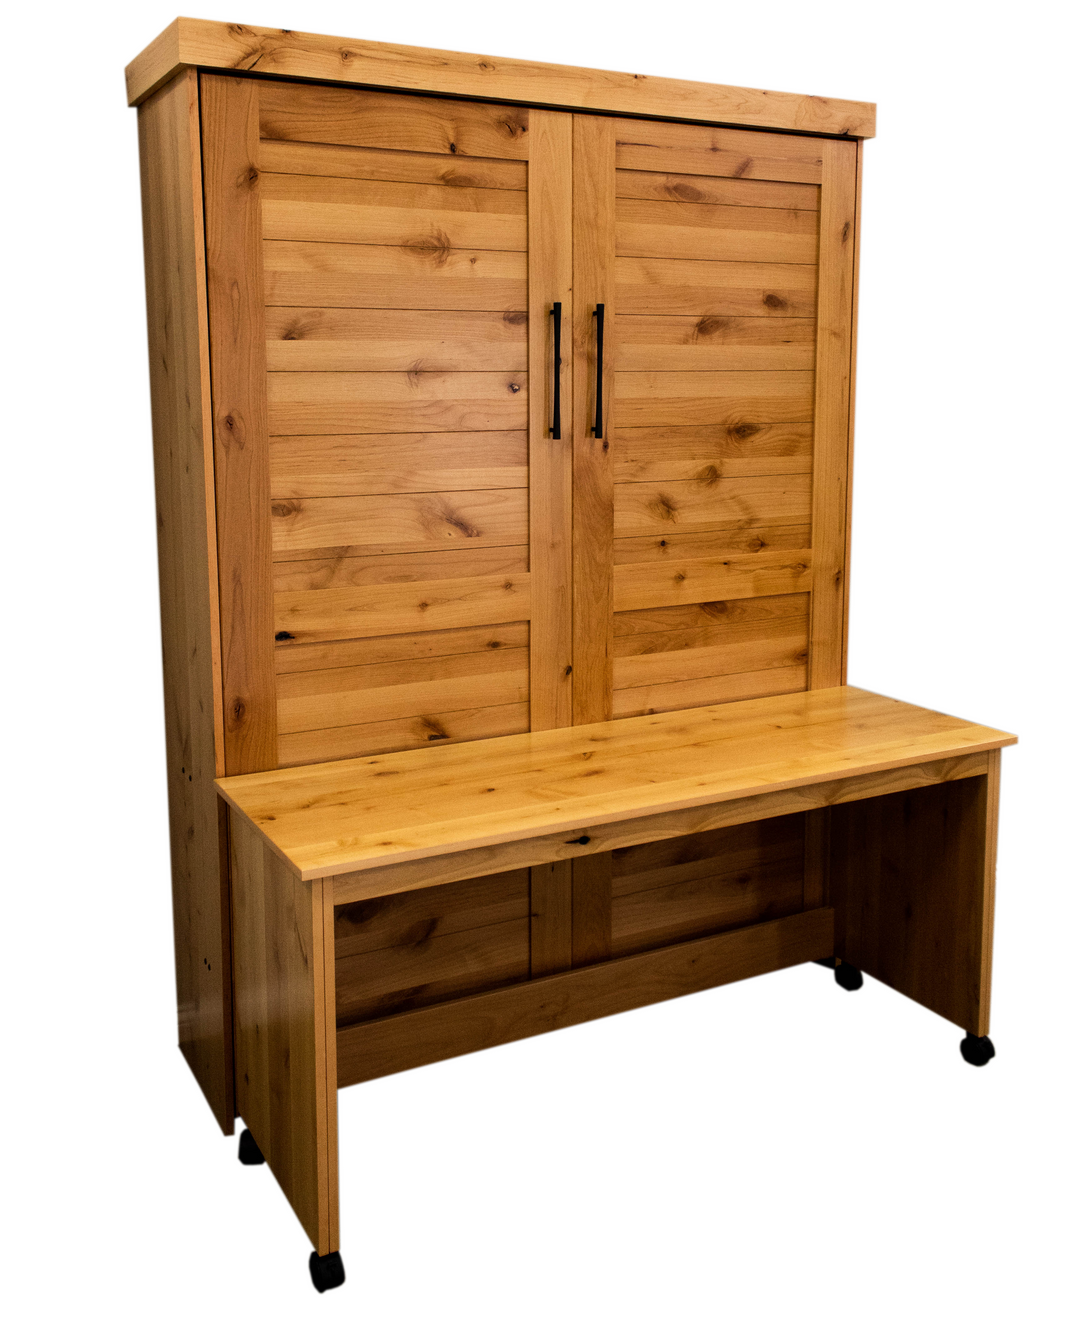 Plank Face Murphy Bed Vertical Queen Knotty Alder Natural Stain With Roll Desk Discounted (VQ121-KNTY)